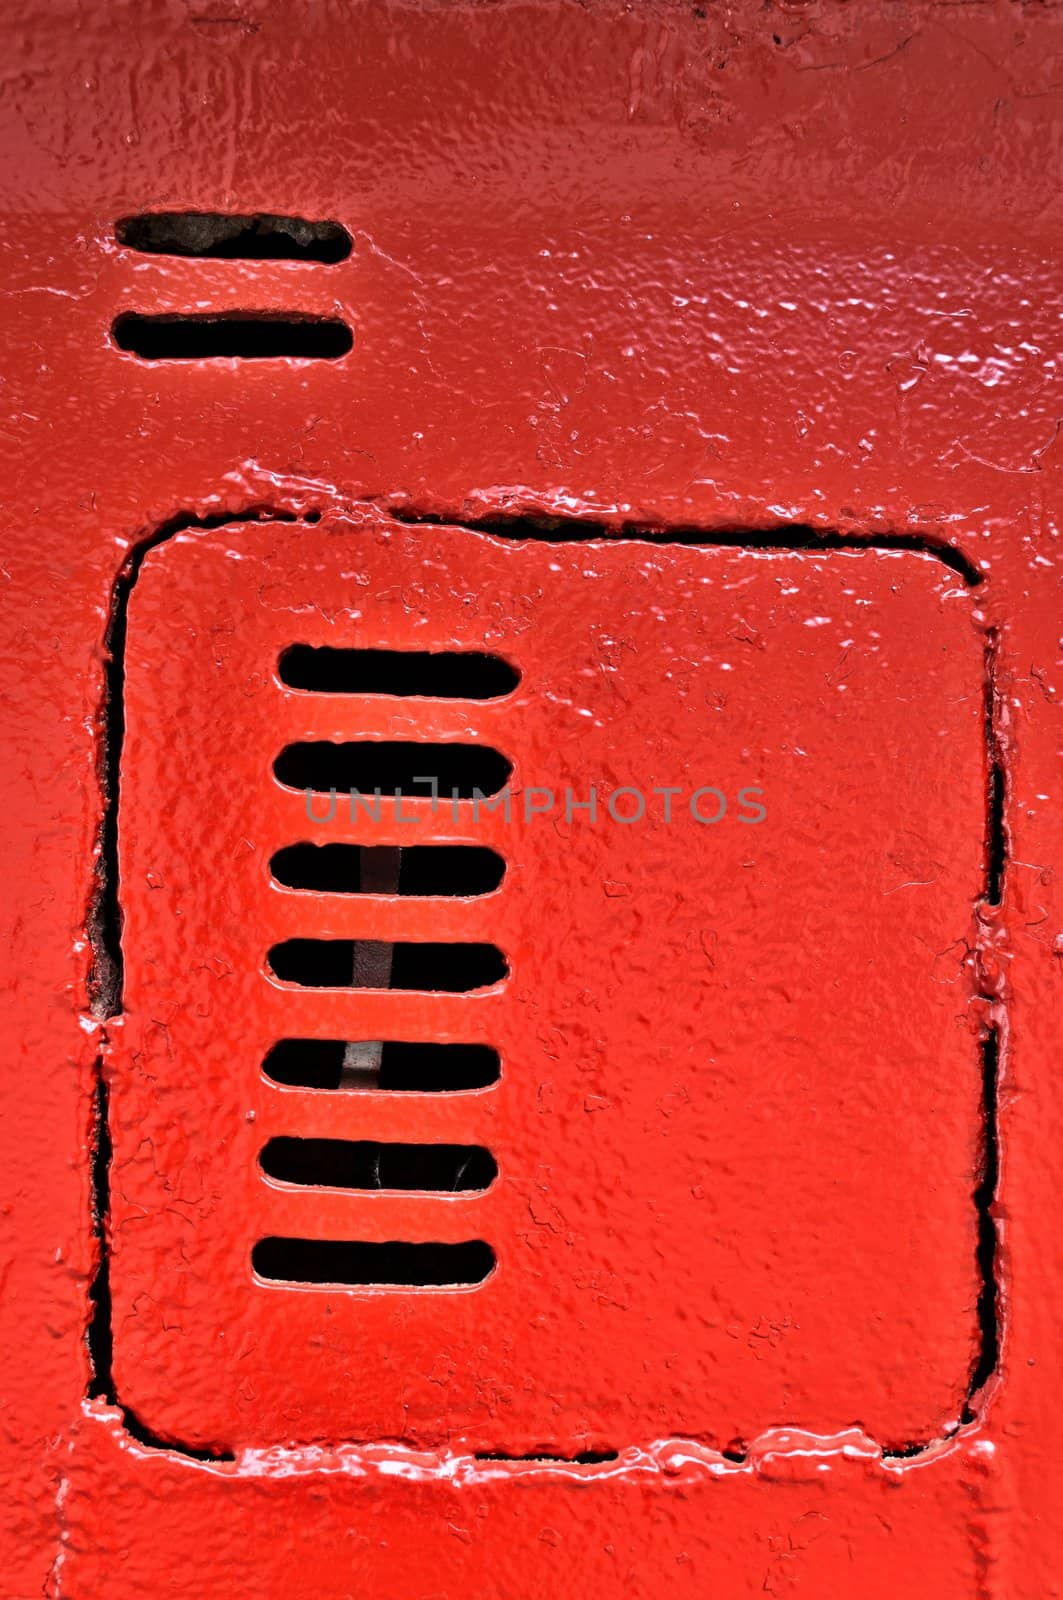 Old metal door with vents, painted with red paint